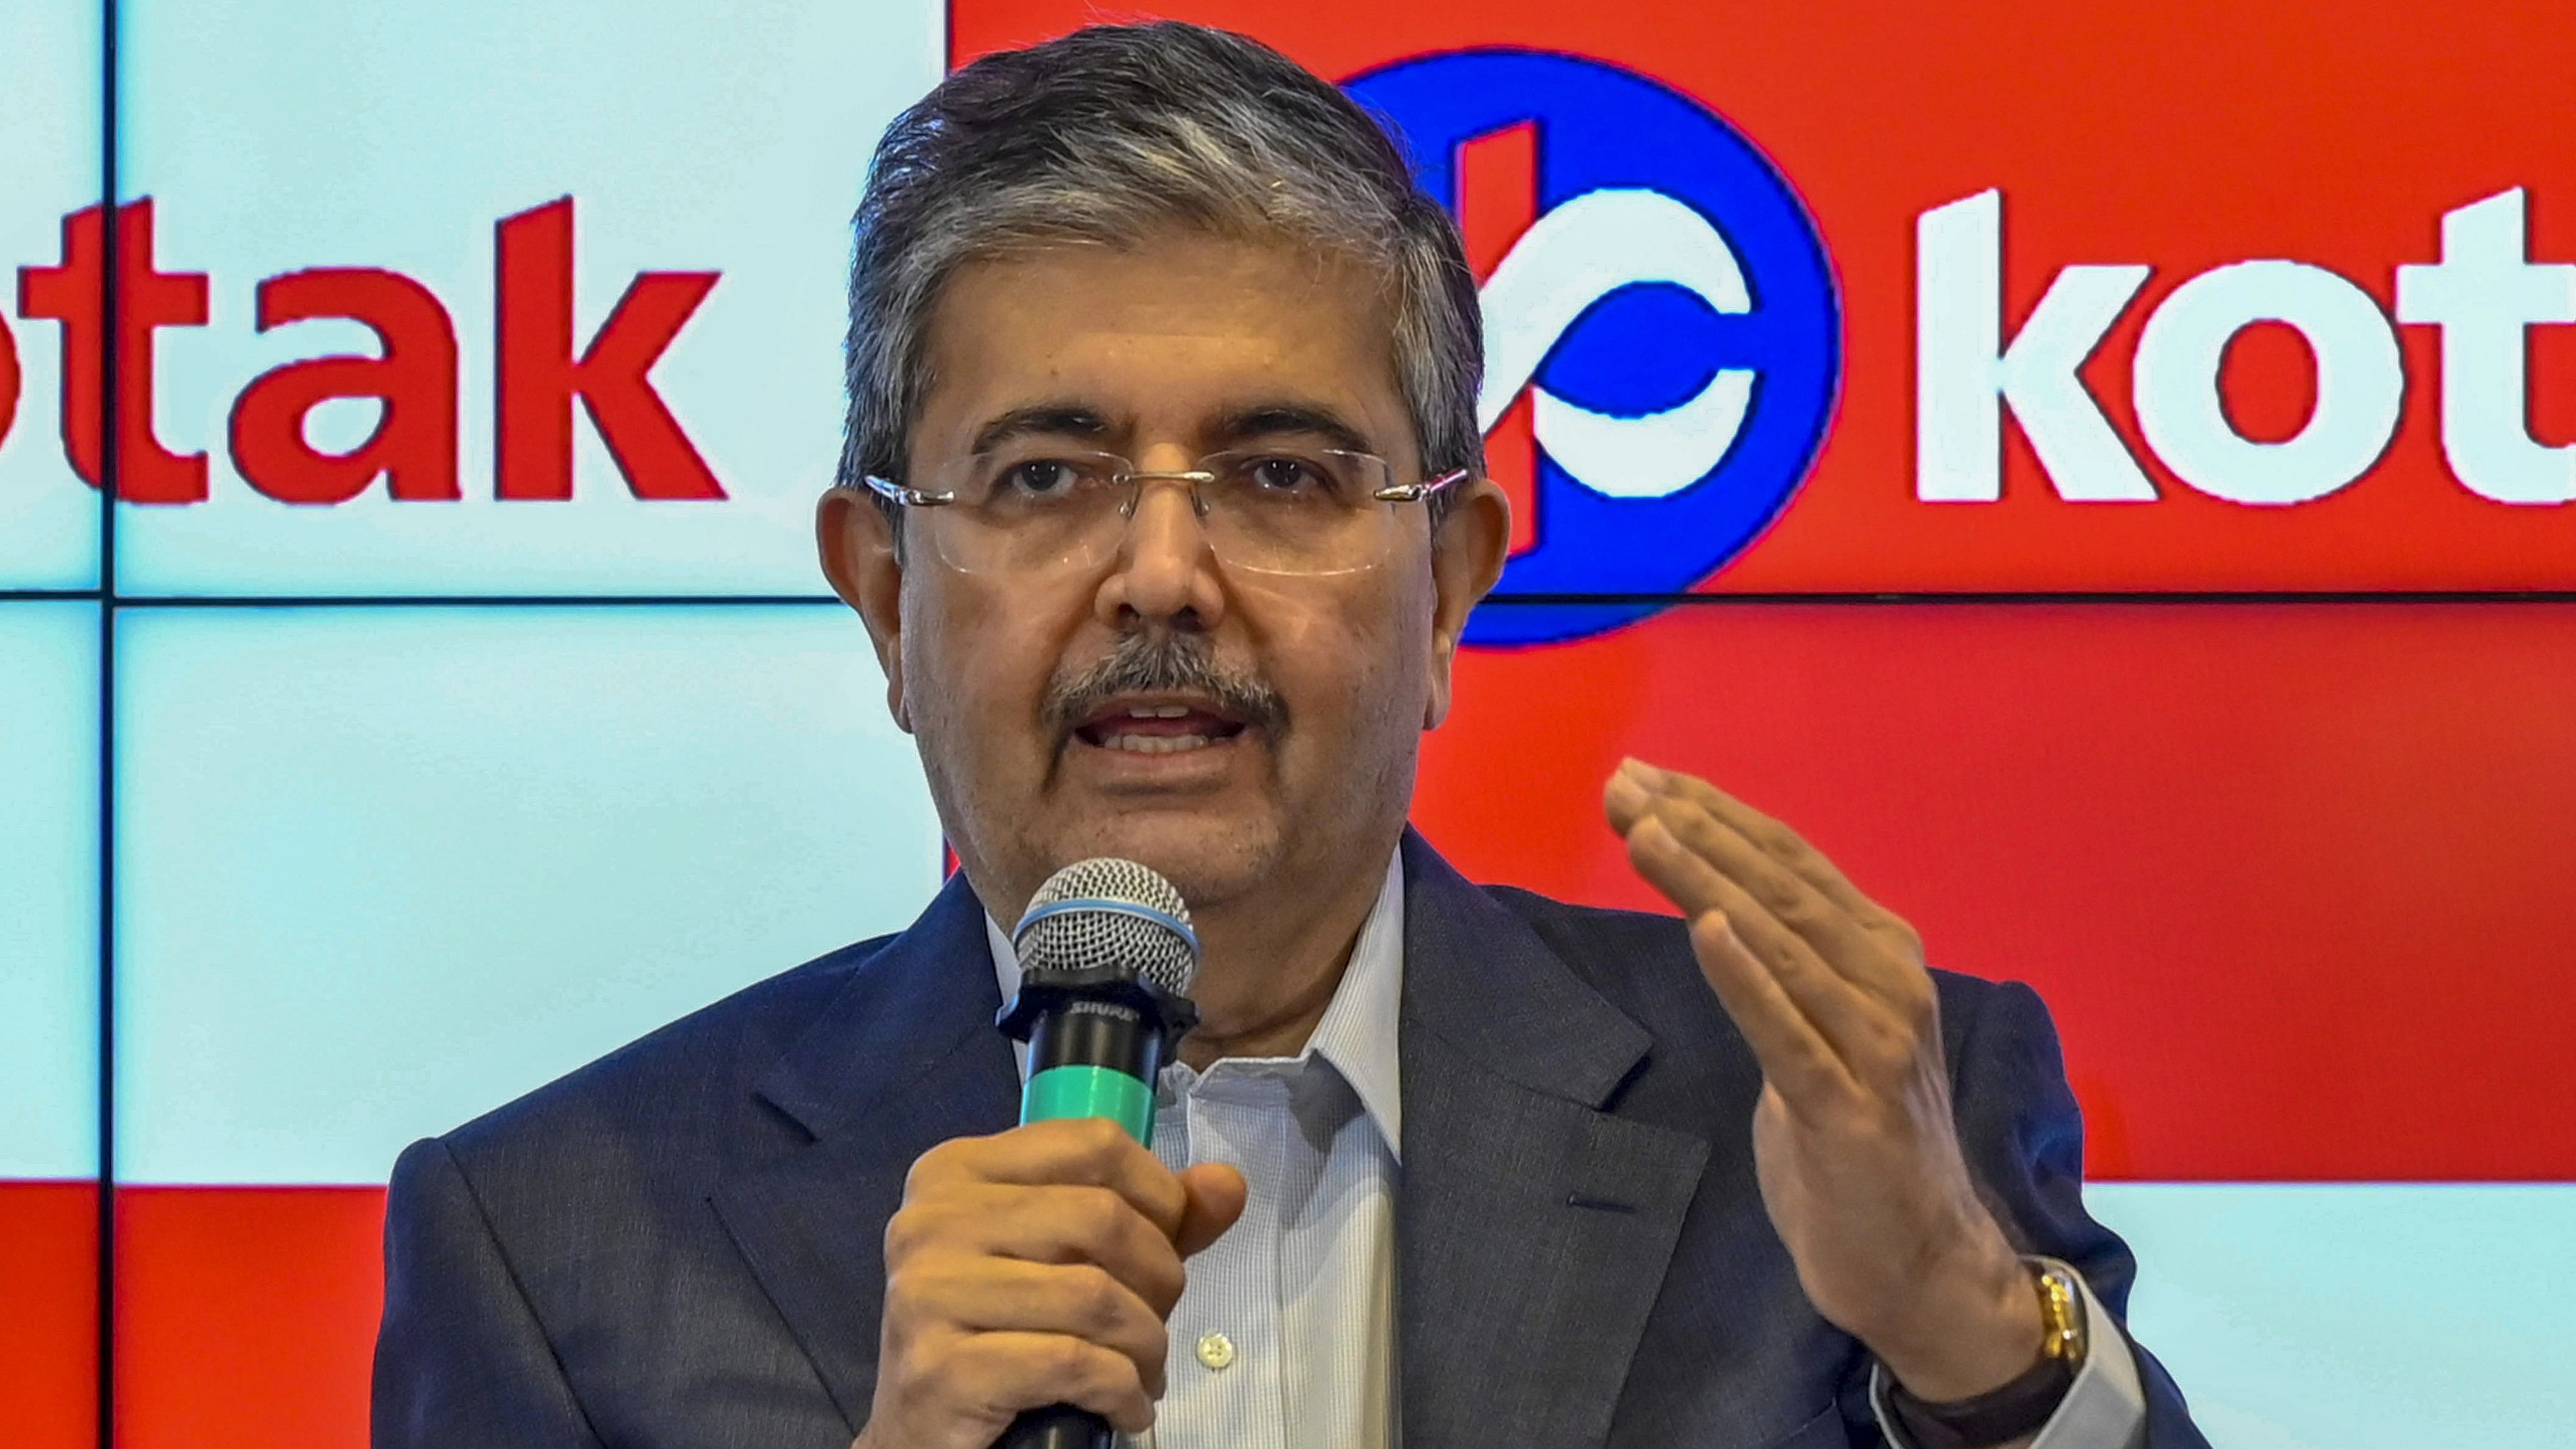 <div class="paragraphs"><p>Uday Kotak resigned as the managing director and chief executive officer of Kotak Mahindra Bank, the bank said in a stock exchange filing on Saturday, Sept. 2, 2023.</p></div>